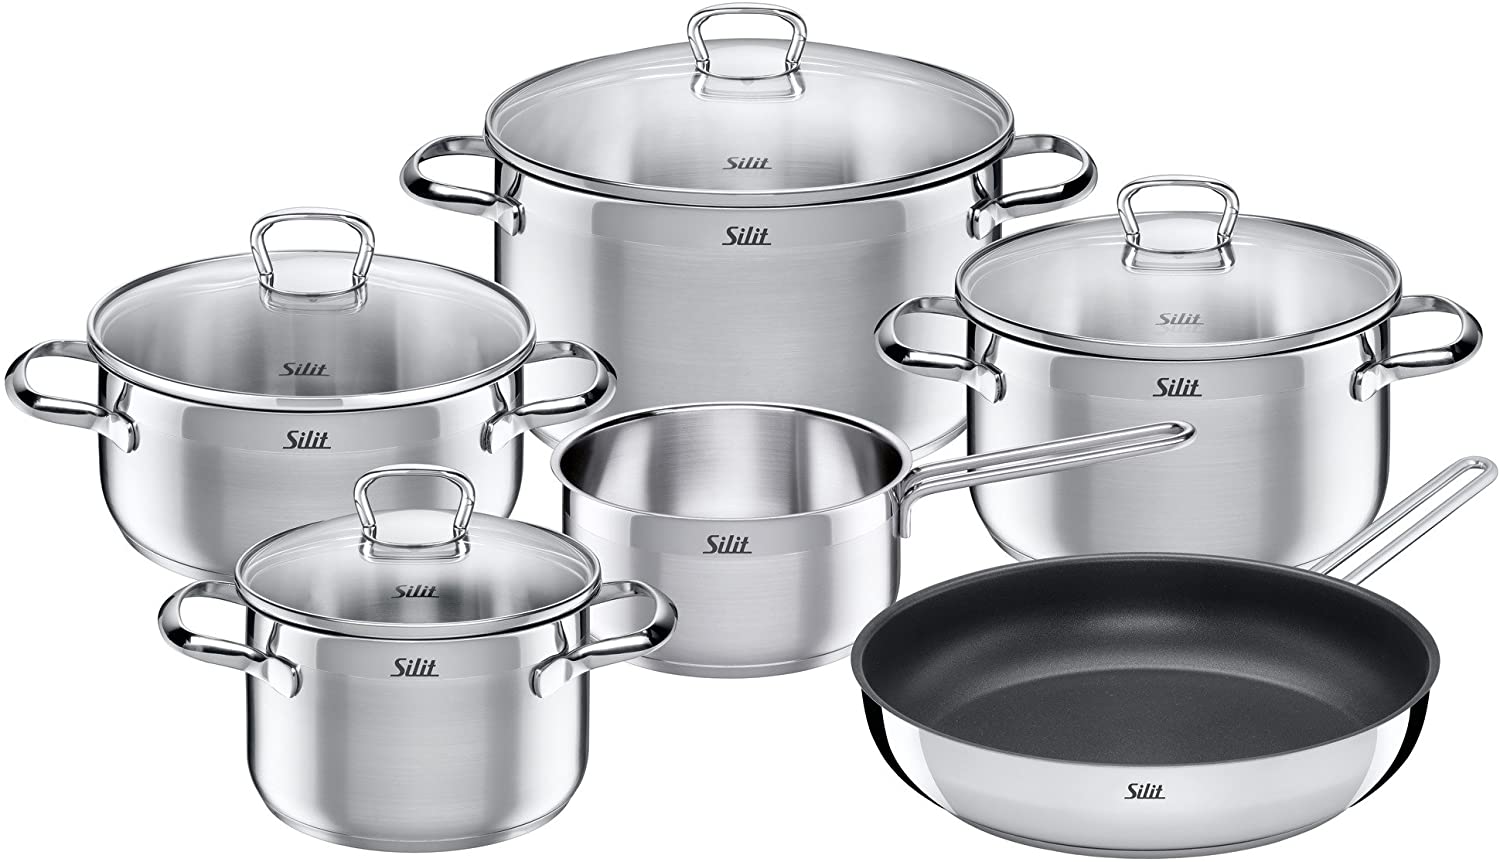 Silit Scalea 6-Piece Cookware Set with Glass Lid / Head Pot / Saucepan / Frying Pan / Polished Stainless Steel / Suitable for Induction Cookers / Dishwasher Safe